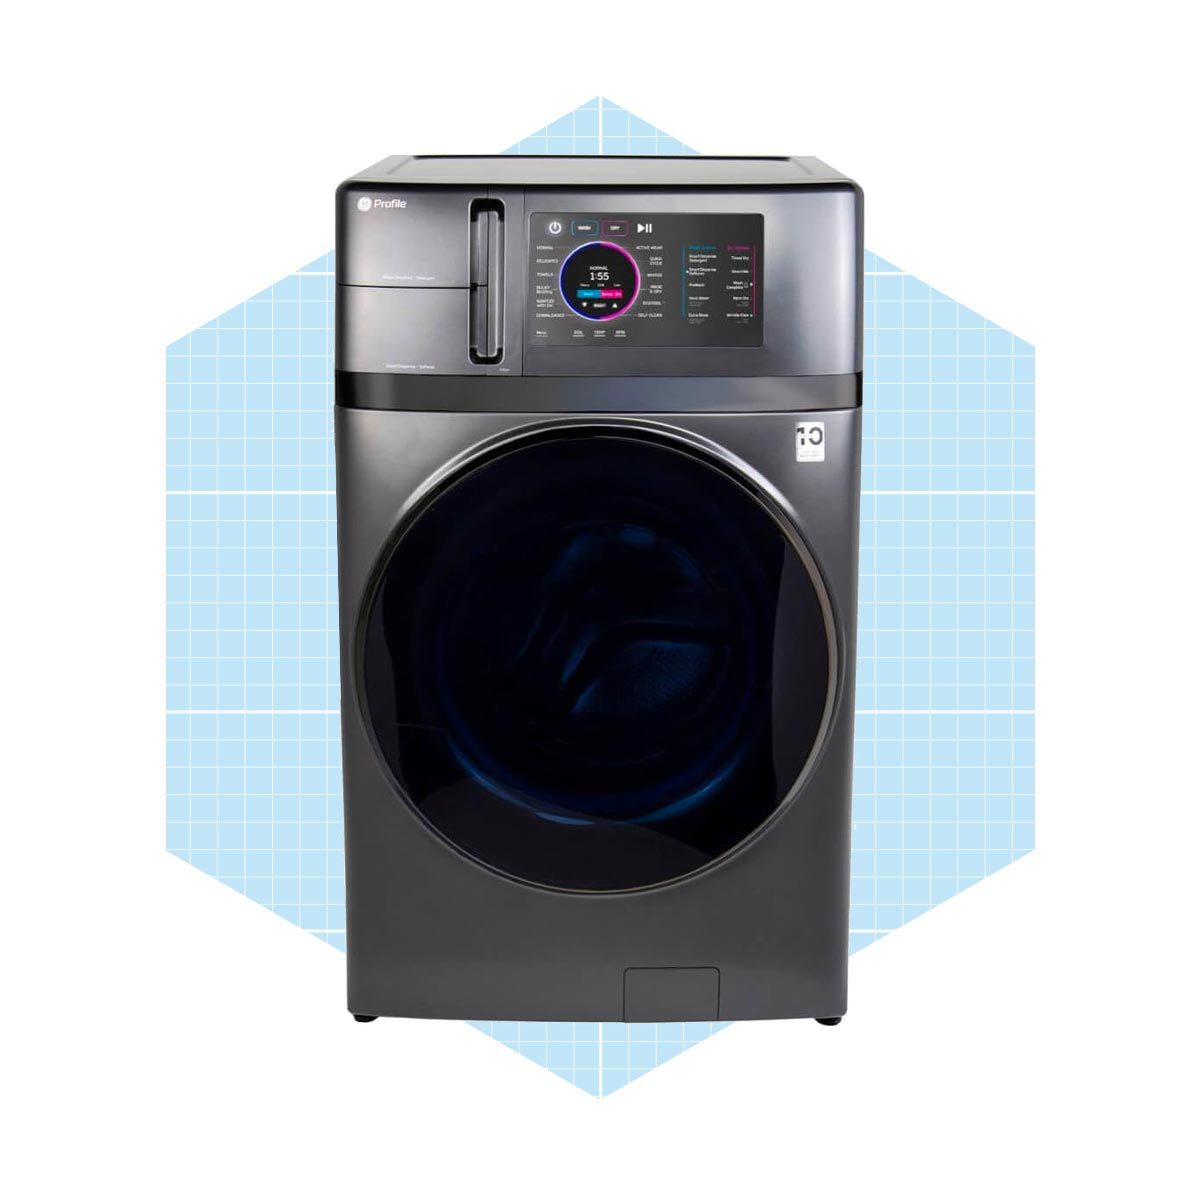 Installing a Washer/Dryer in Your NYC Apartment